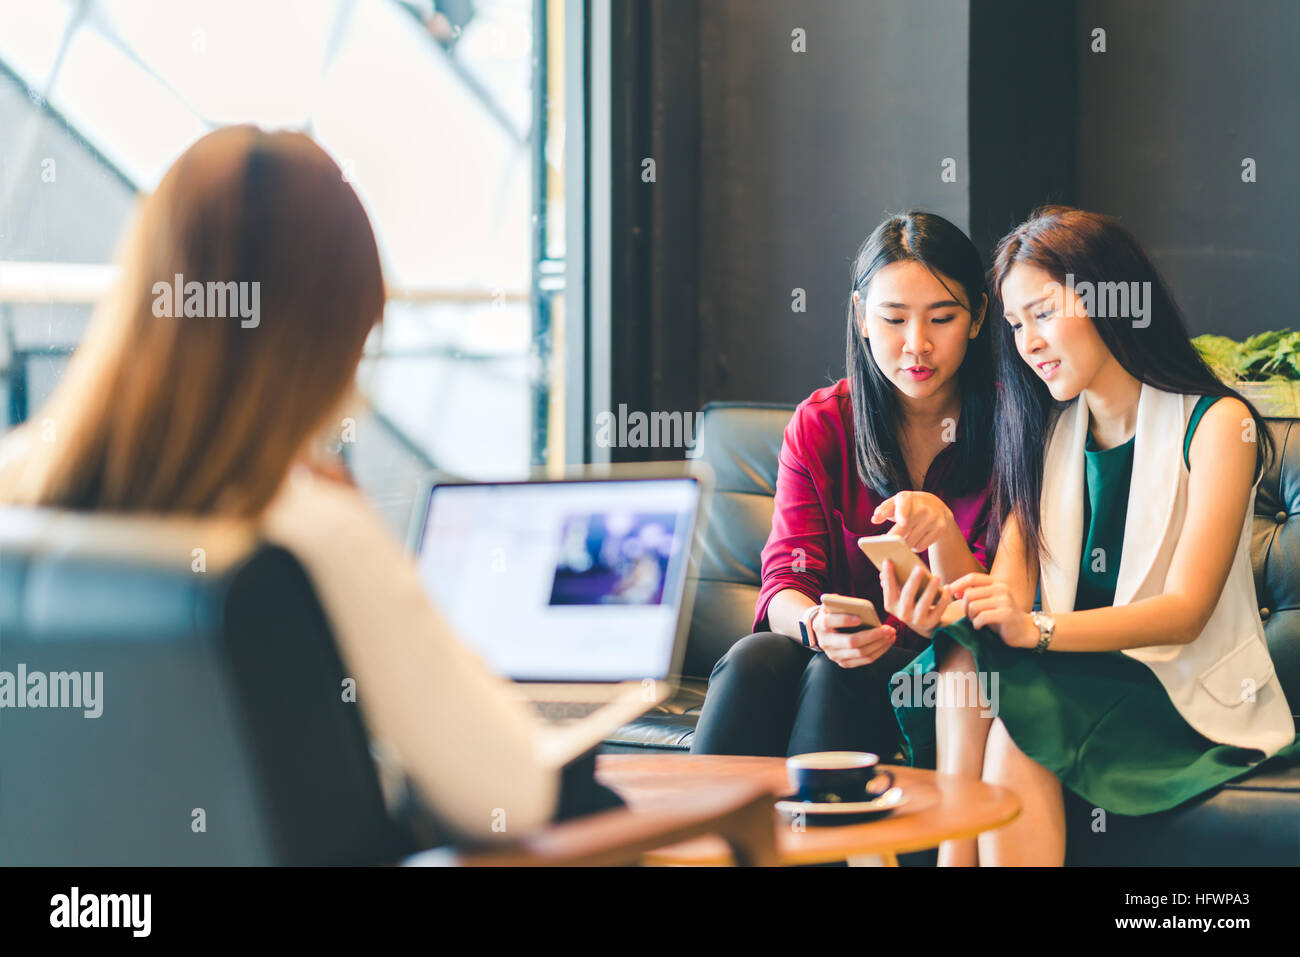 Beautiful Asian girls using smartphone and laptop, chatting on sofa at cafe, modern lifestyle with gadget technology or working woman on casual busine Stock Photo